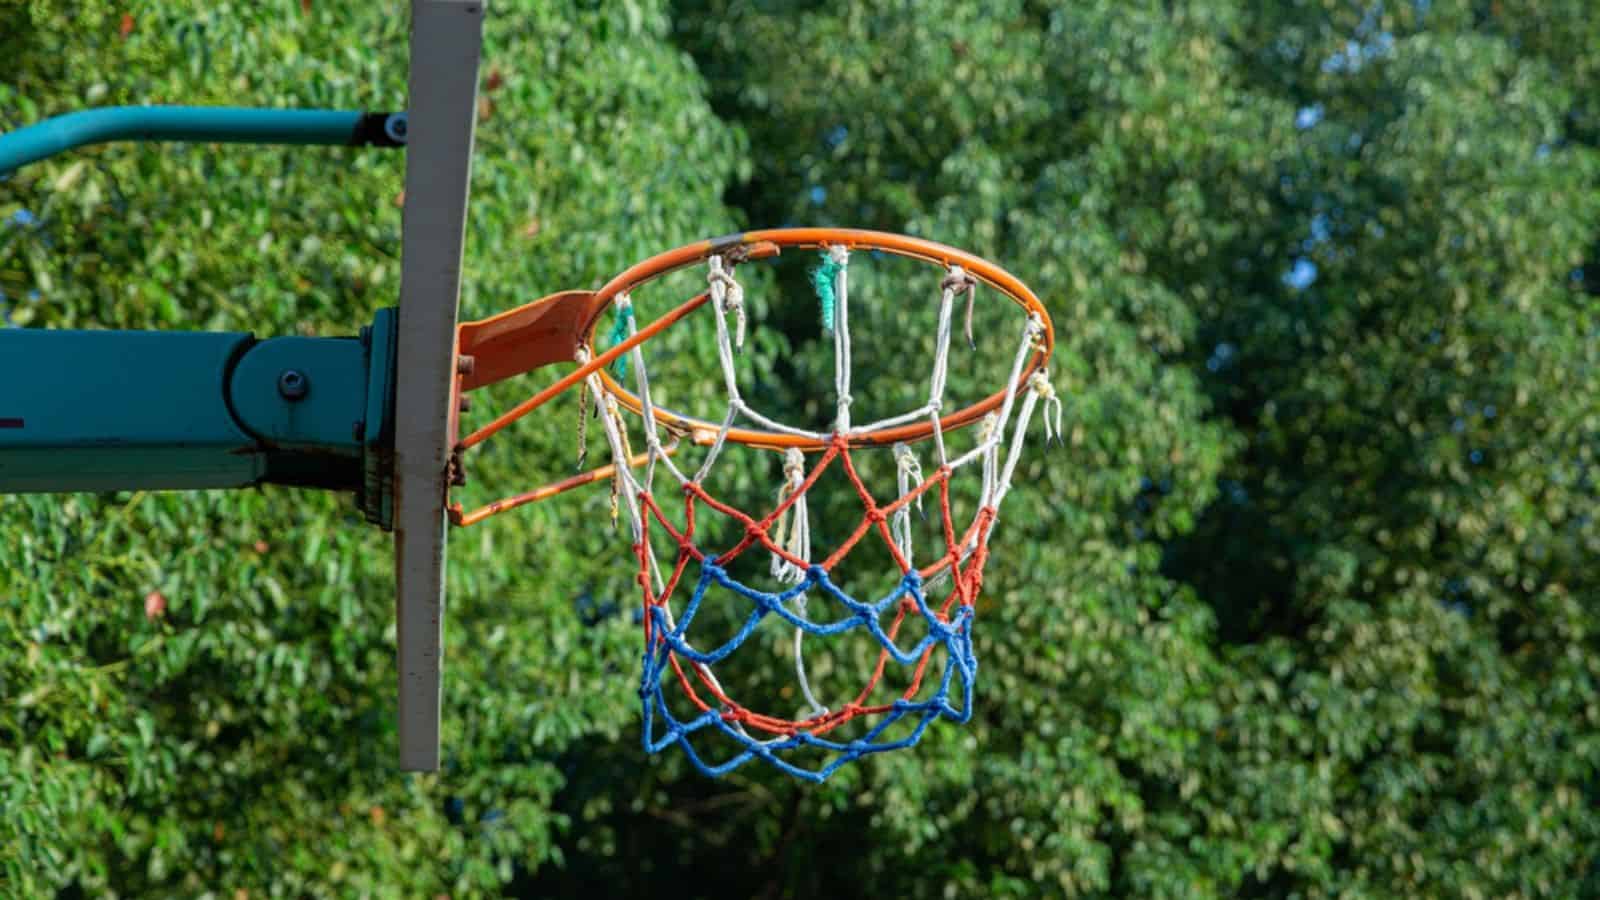 Basketball hoop with colored net